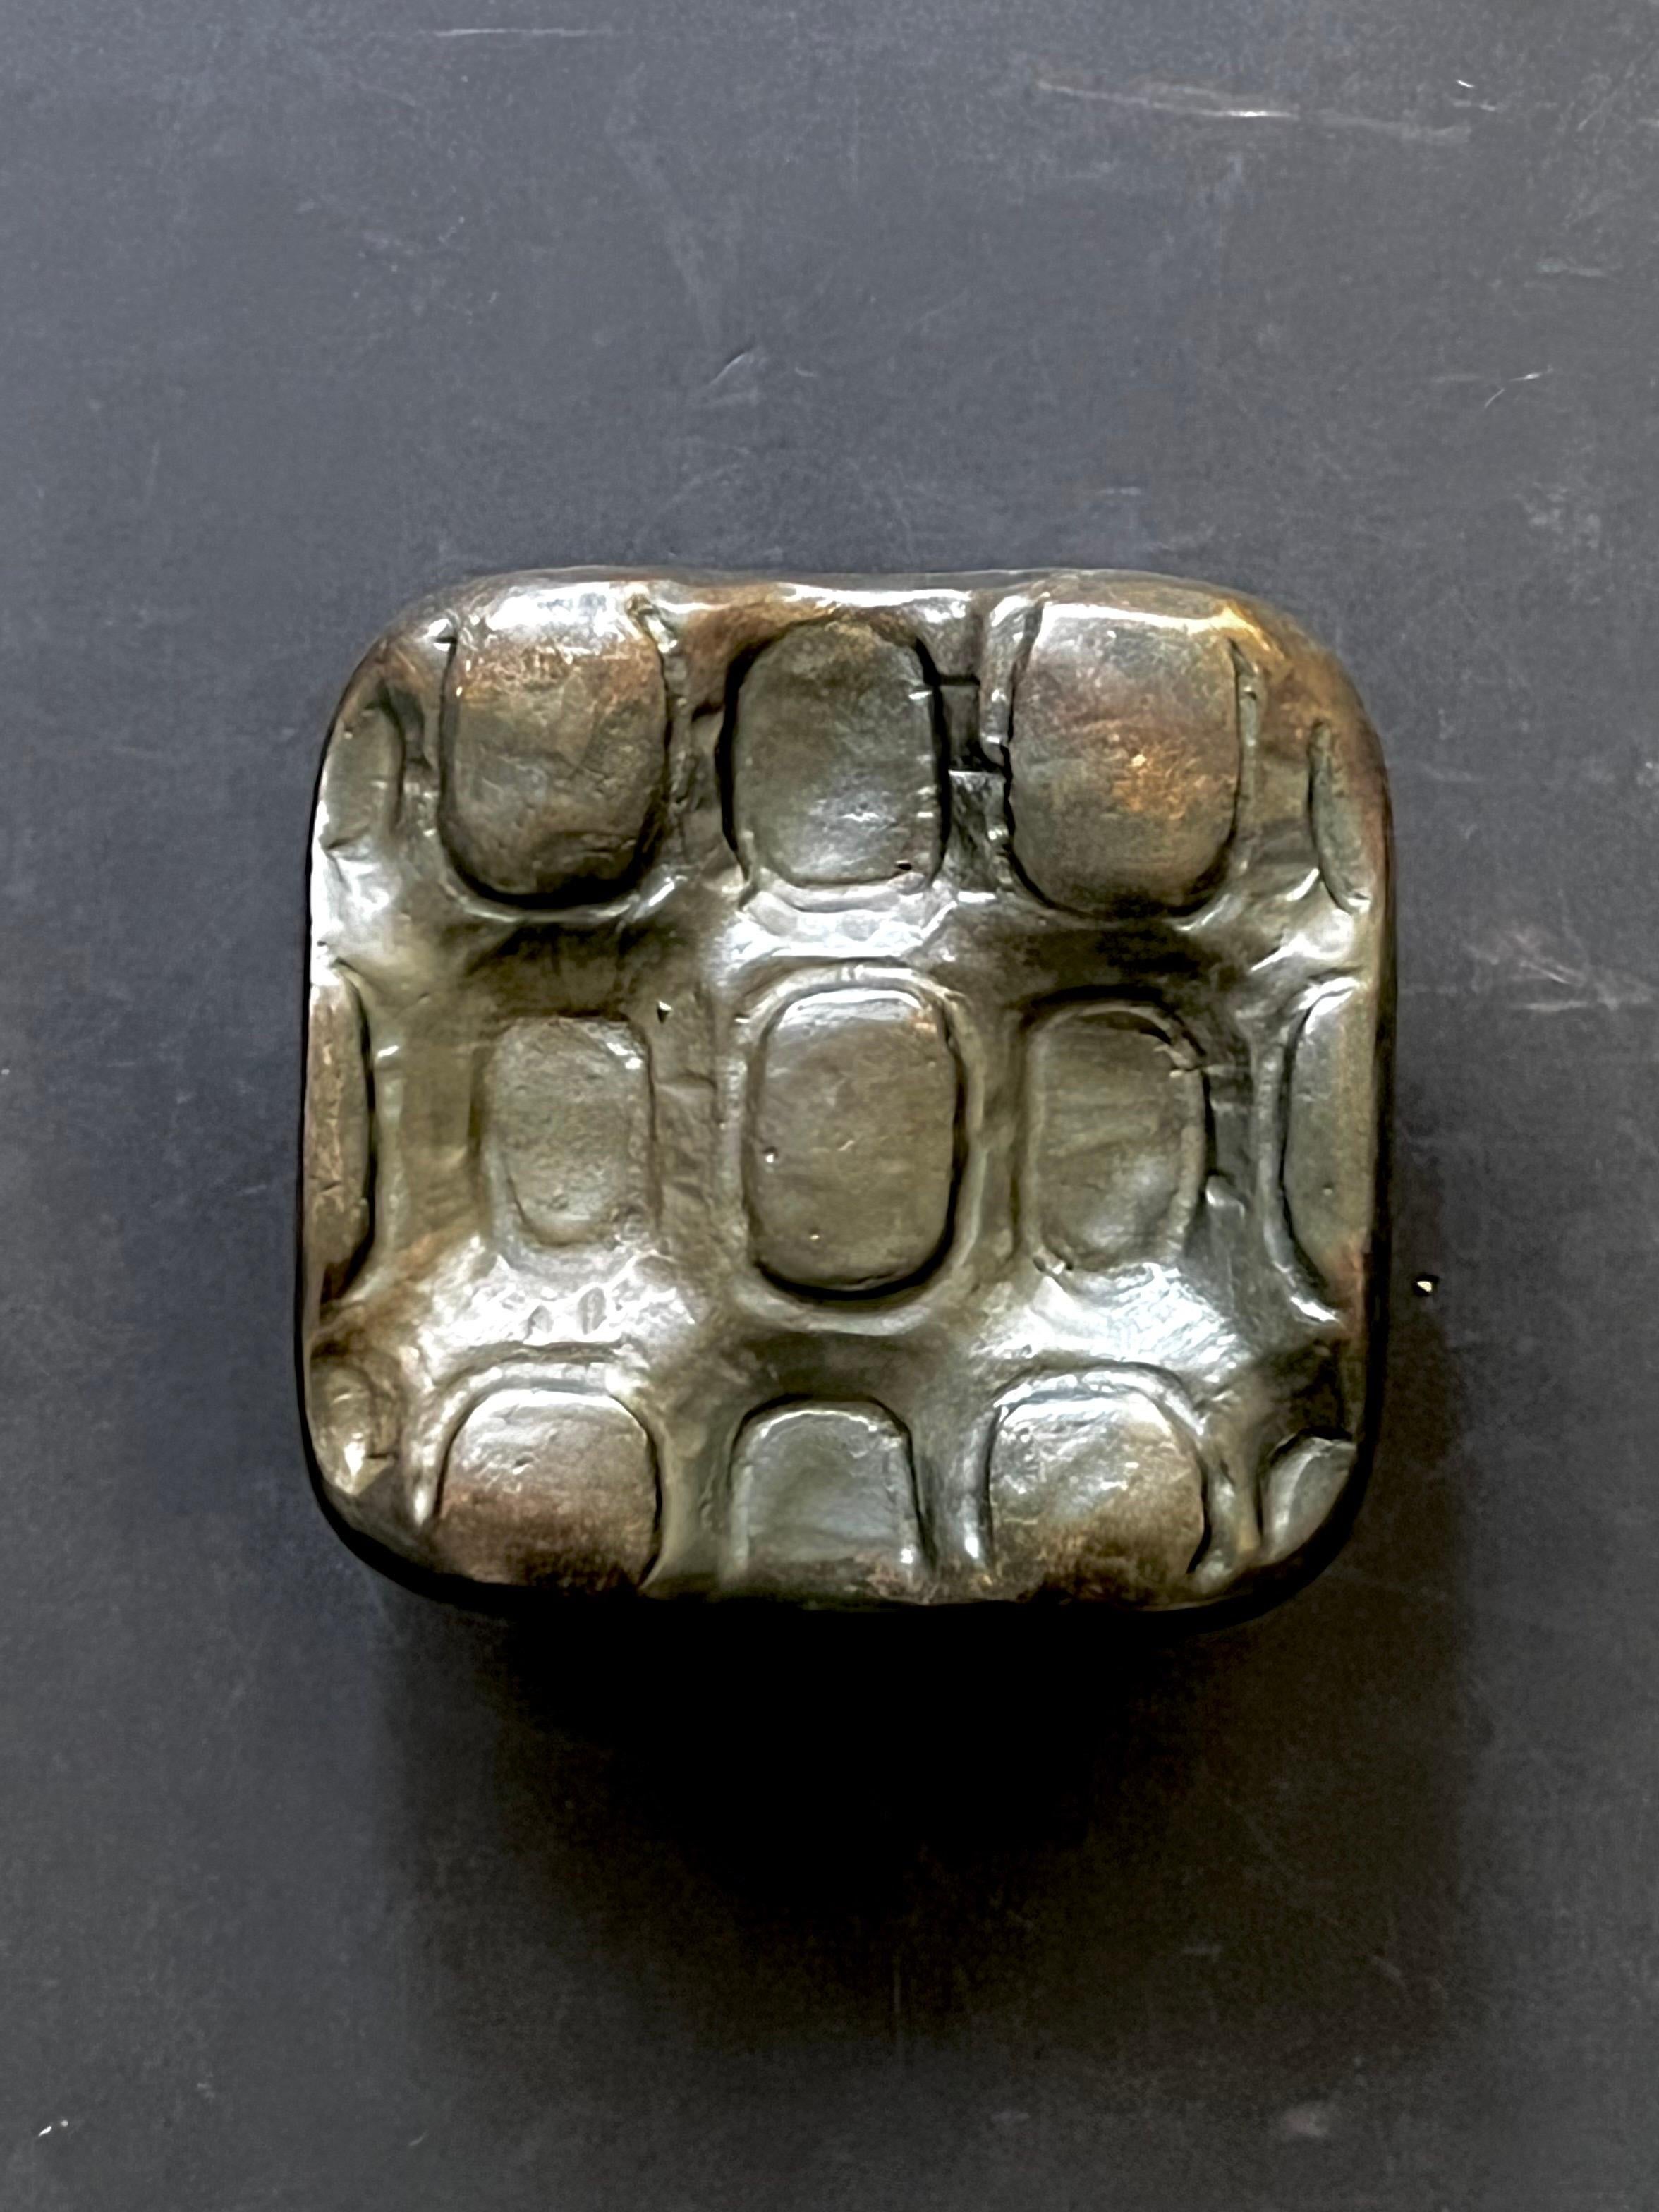 A sculptural bronze push or pull door handle with abstract relief. Second half 20th century (probably 1970s), found in Germany.

A heavy piece, made of cast metal, with very nice changing tones from use; unpolished and retaining a heavy deep brown